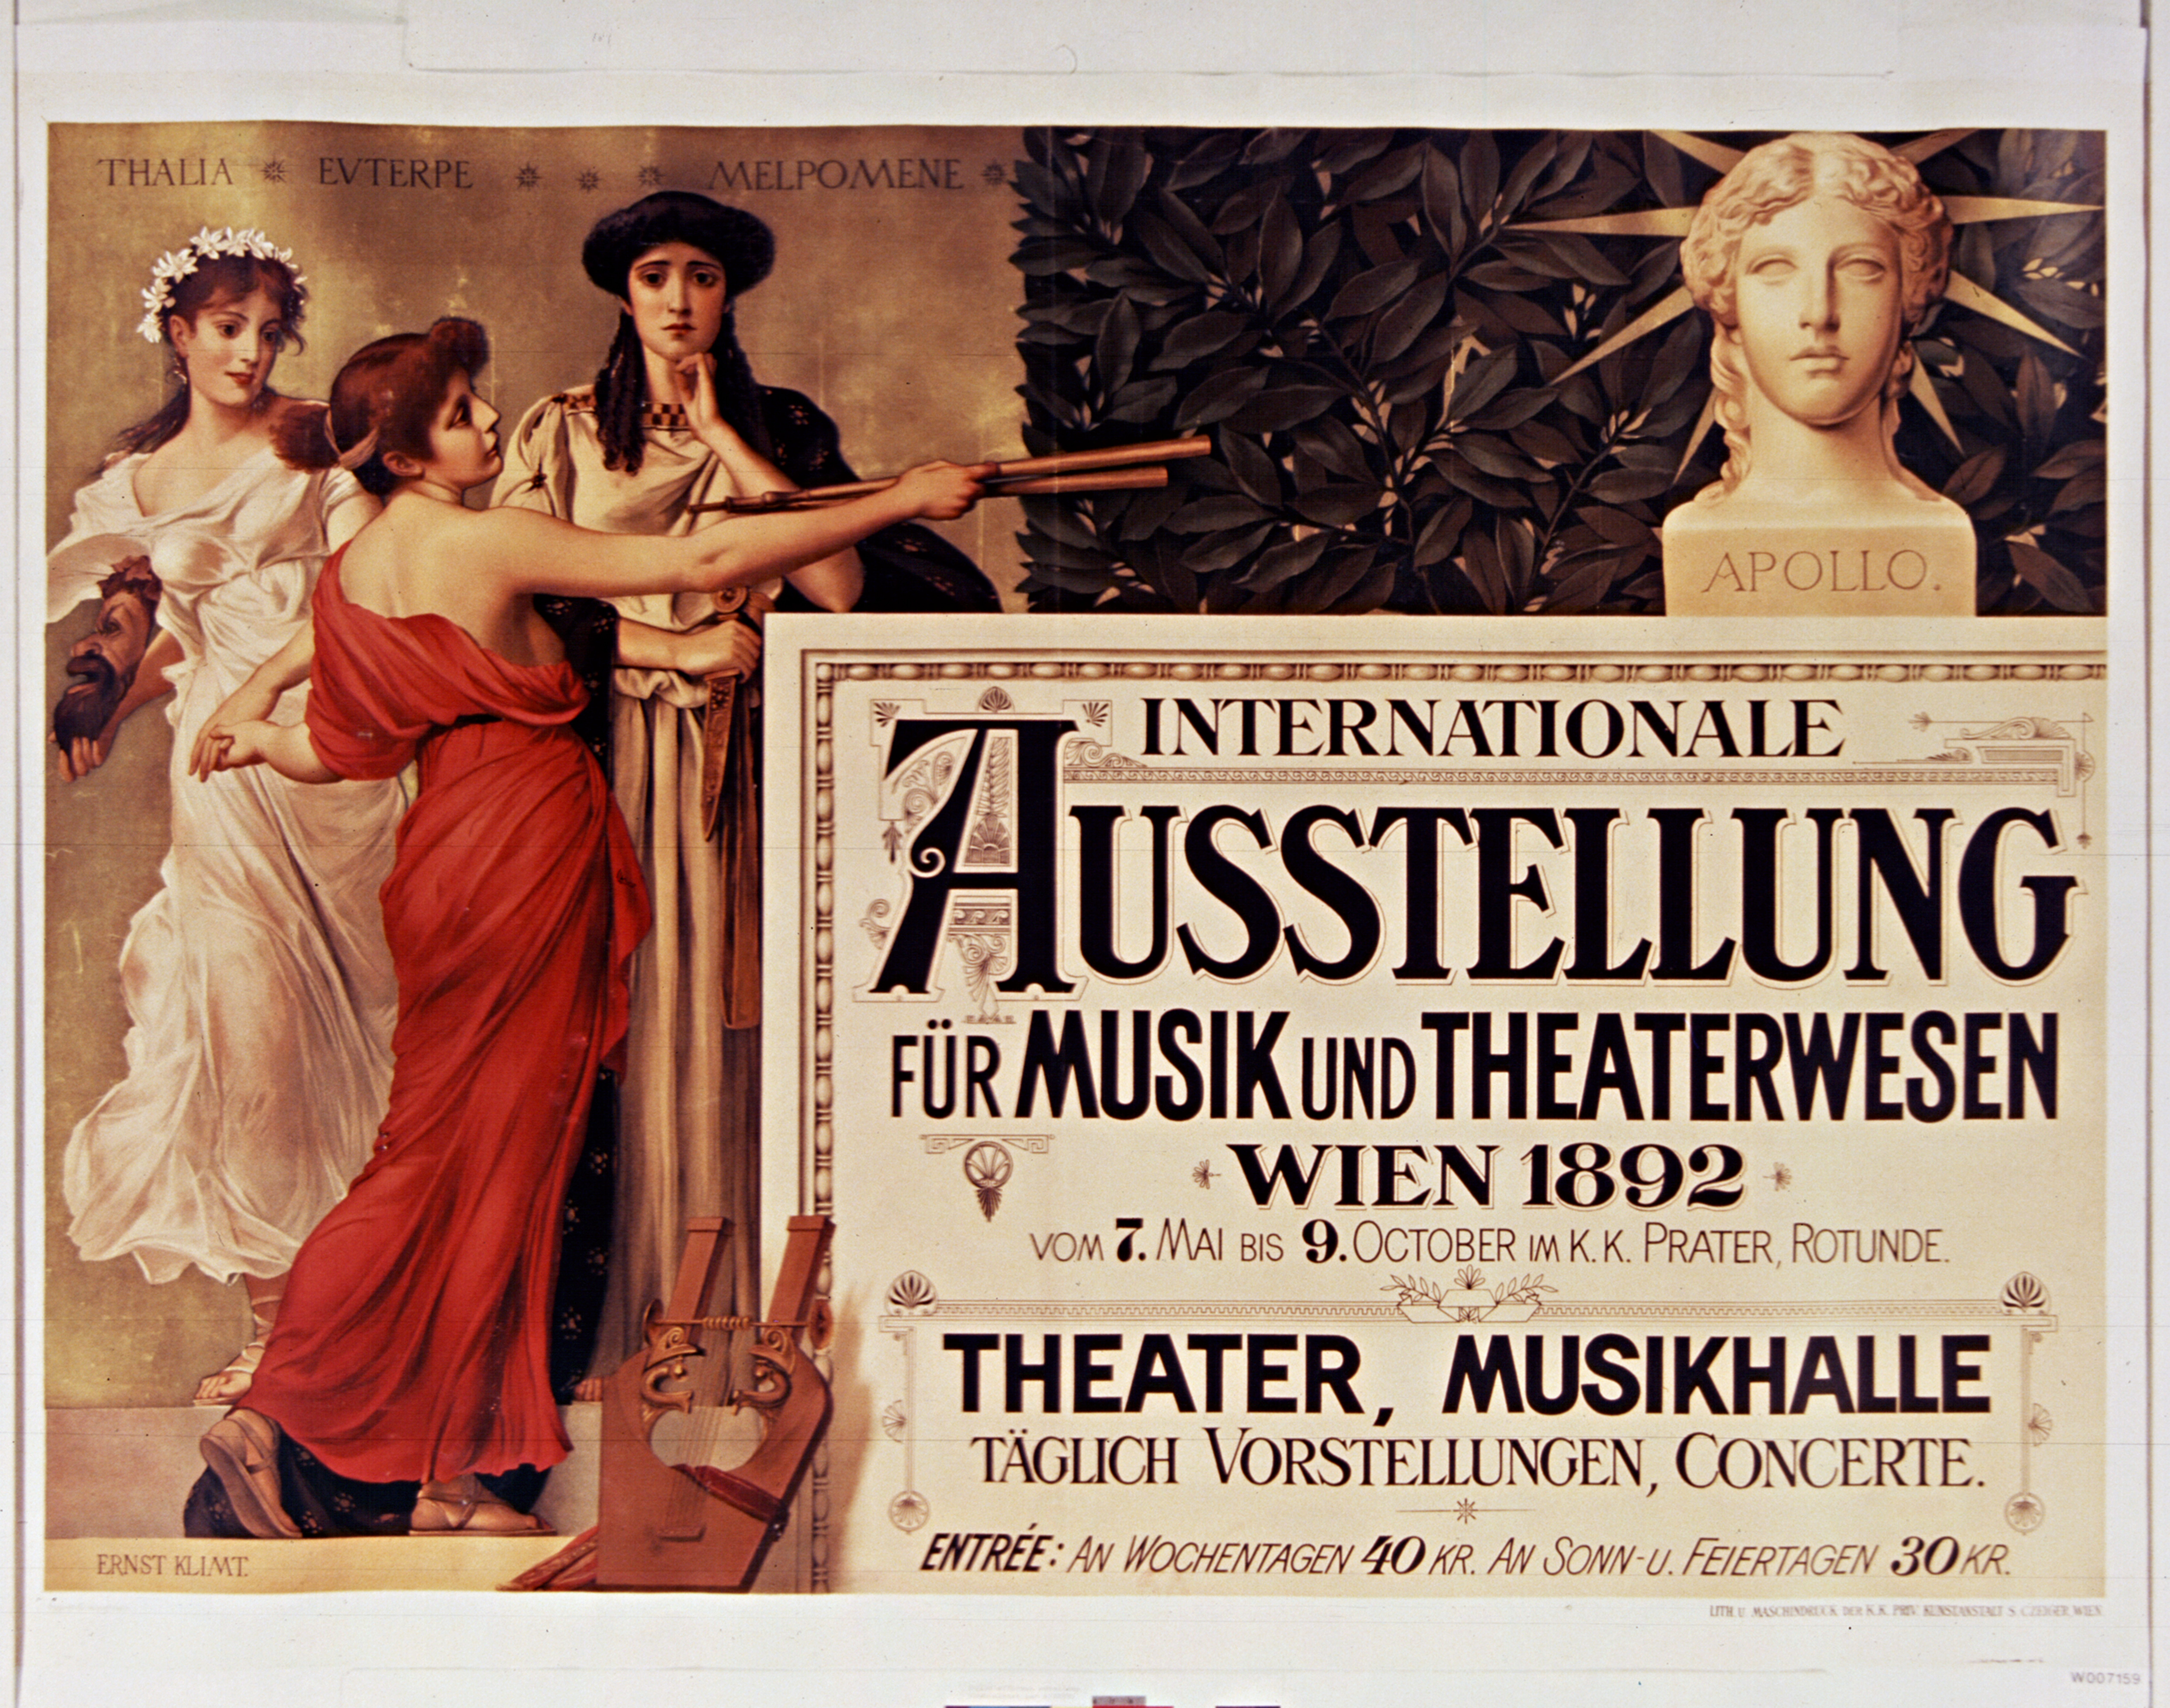 An illustrated poster of three women promoting the Vienna Musical Theatrical Exhibition.